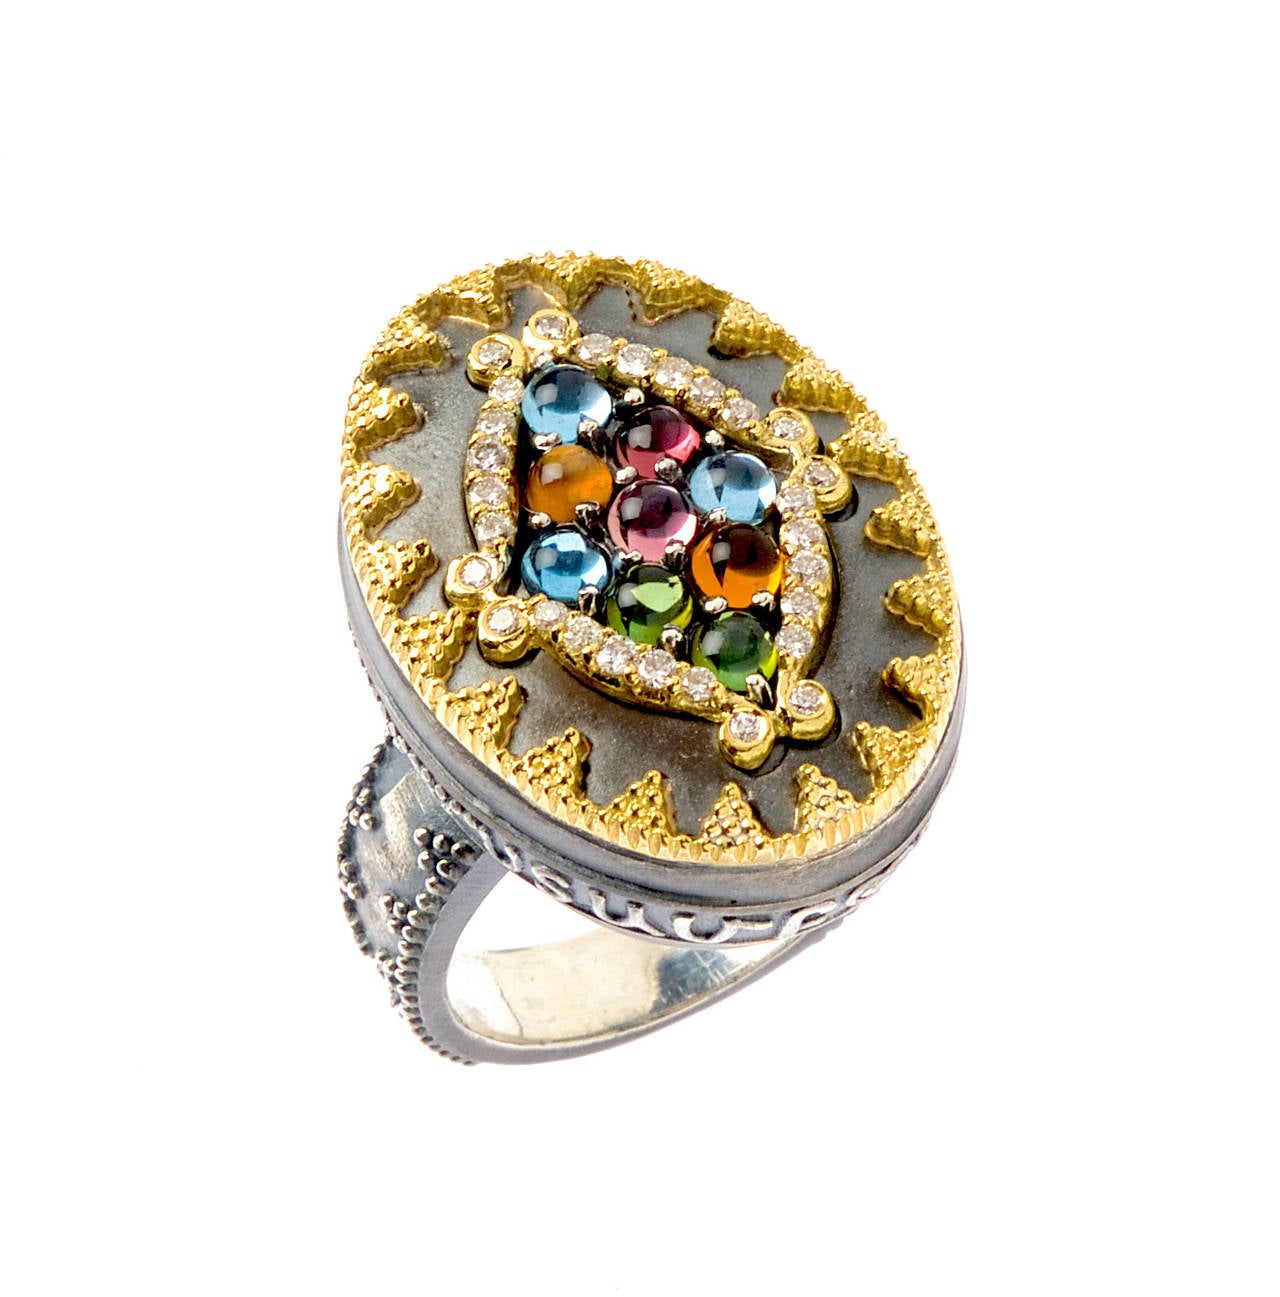 Aged Silver & 18K Gold Ring with Tourmaline Cluster surrounded by diamonds

1.42 ct. apprx. Tourmalines

0.32 ct. apprx. Diamonds

On the edge of the ring reads STAMBOLIAN in Armenian letters. 

Available in sizes: 5-12

Signed STAMBOLIAN with our